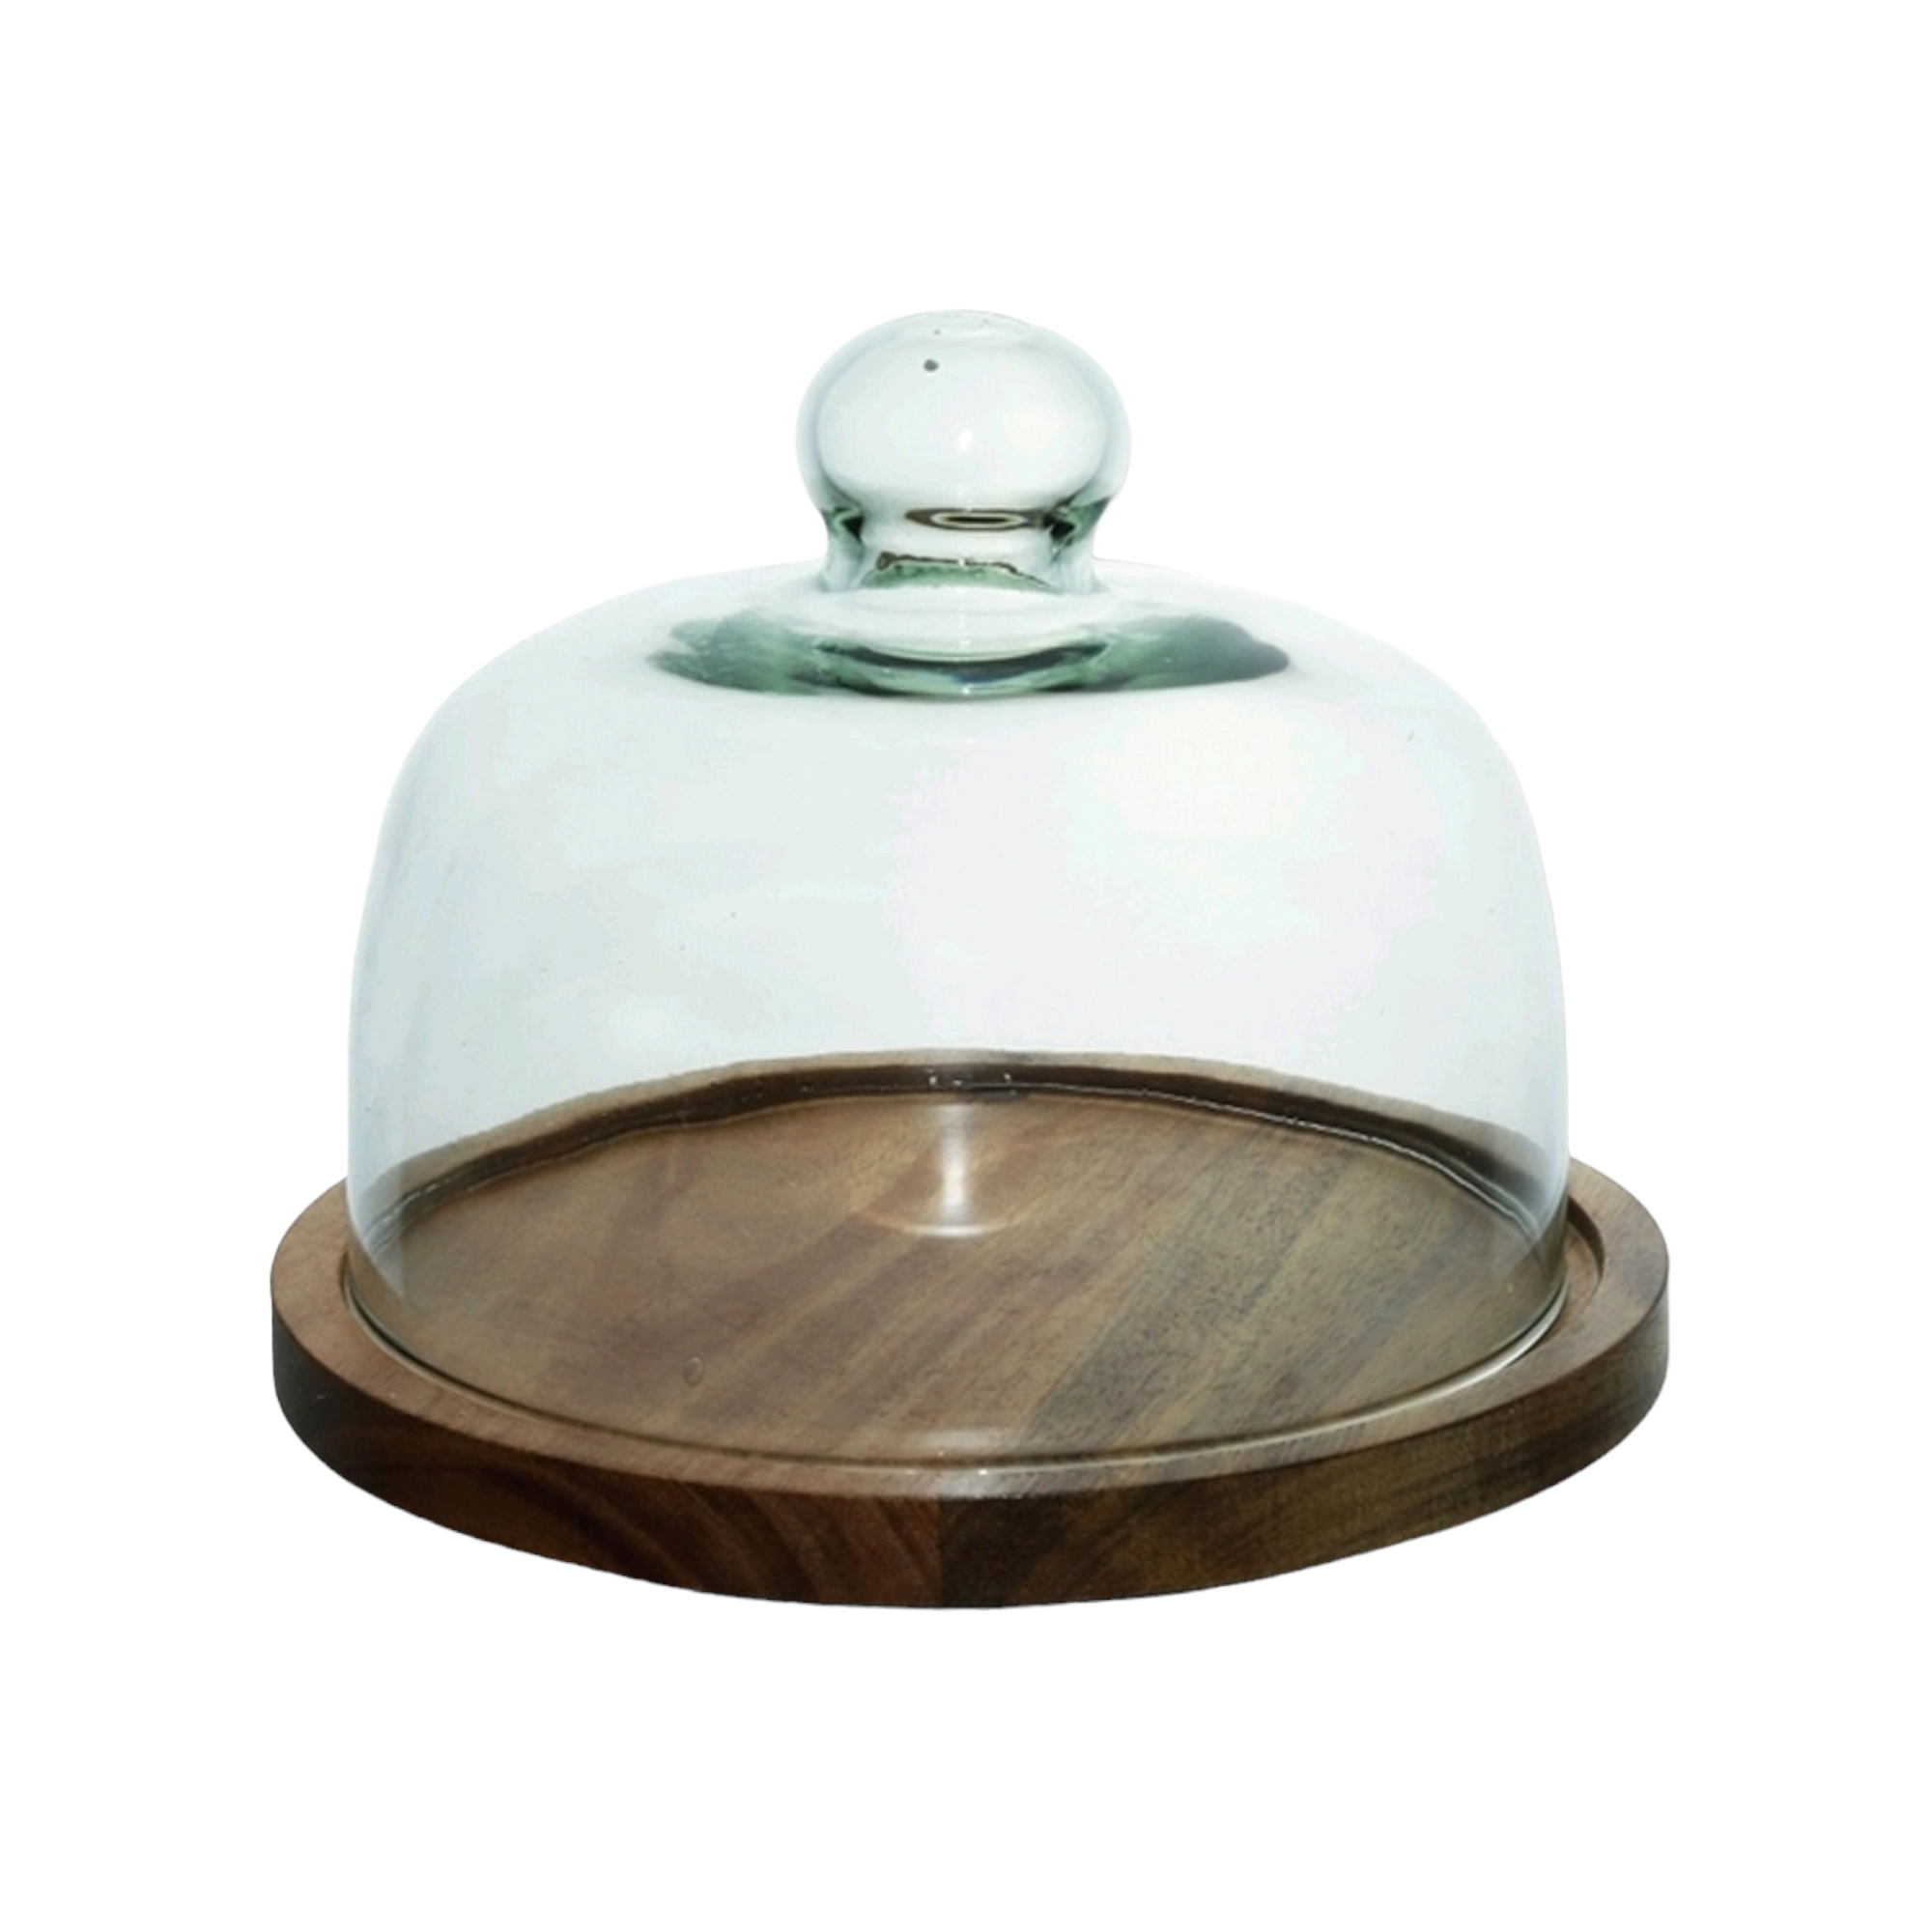 Glass Patisserie Cake Dome Server with Acacia Base Turntable 34563